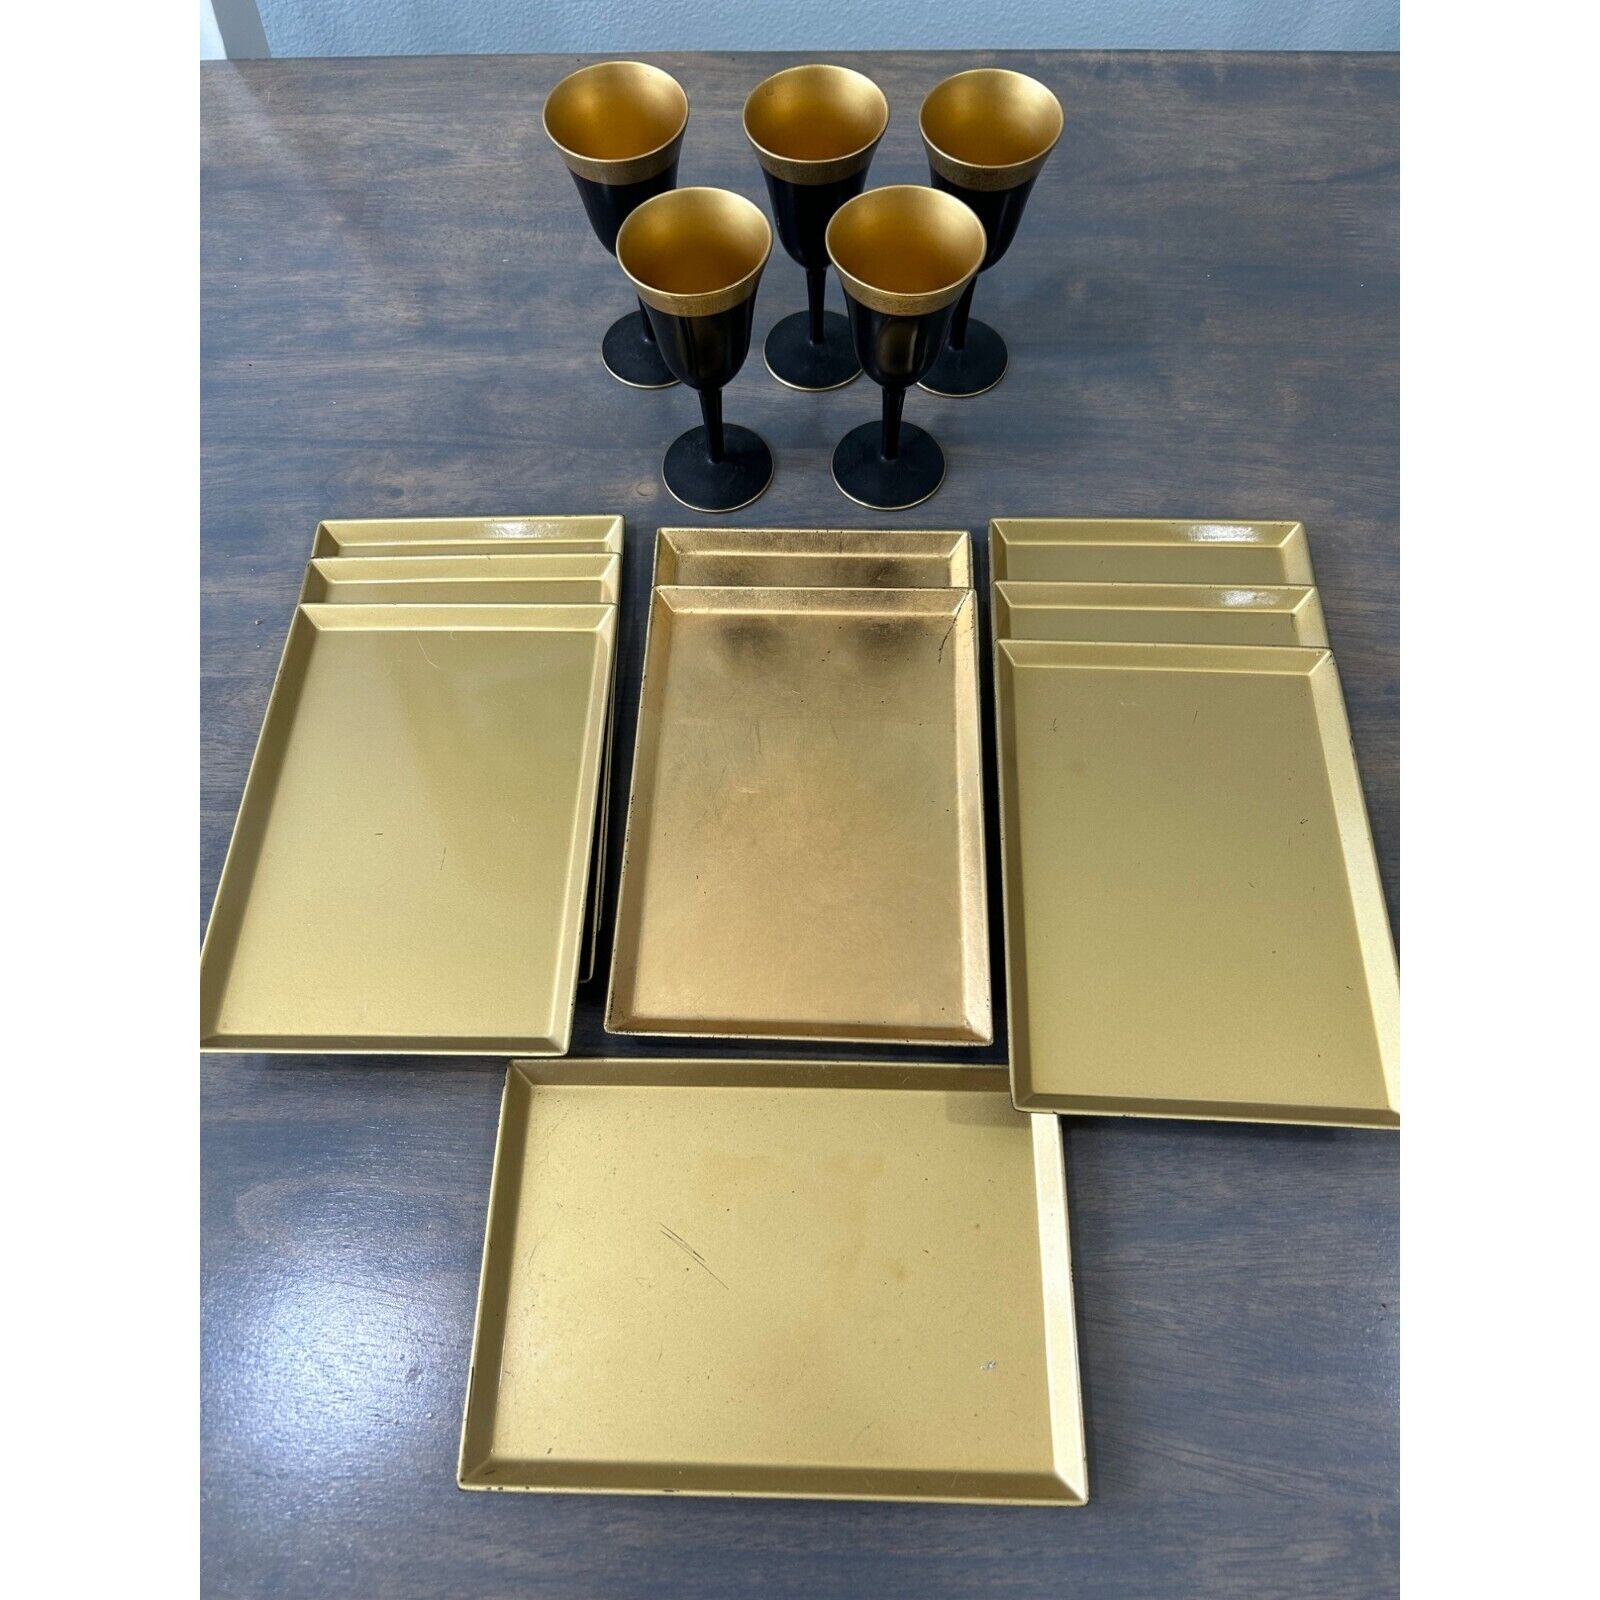 Vintage Japanese Gold and Black Rectangle Plates and Wood Lacquer Sake/Wine Glas